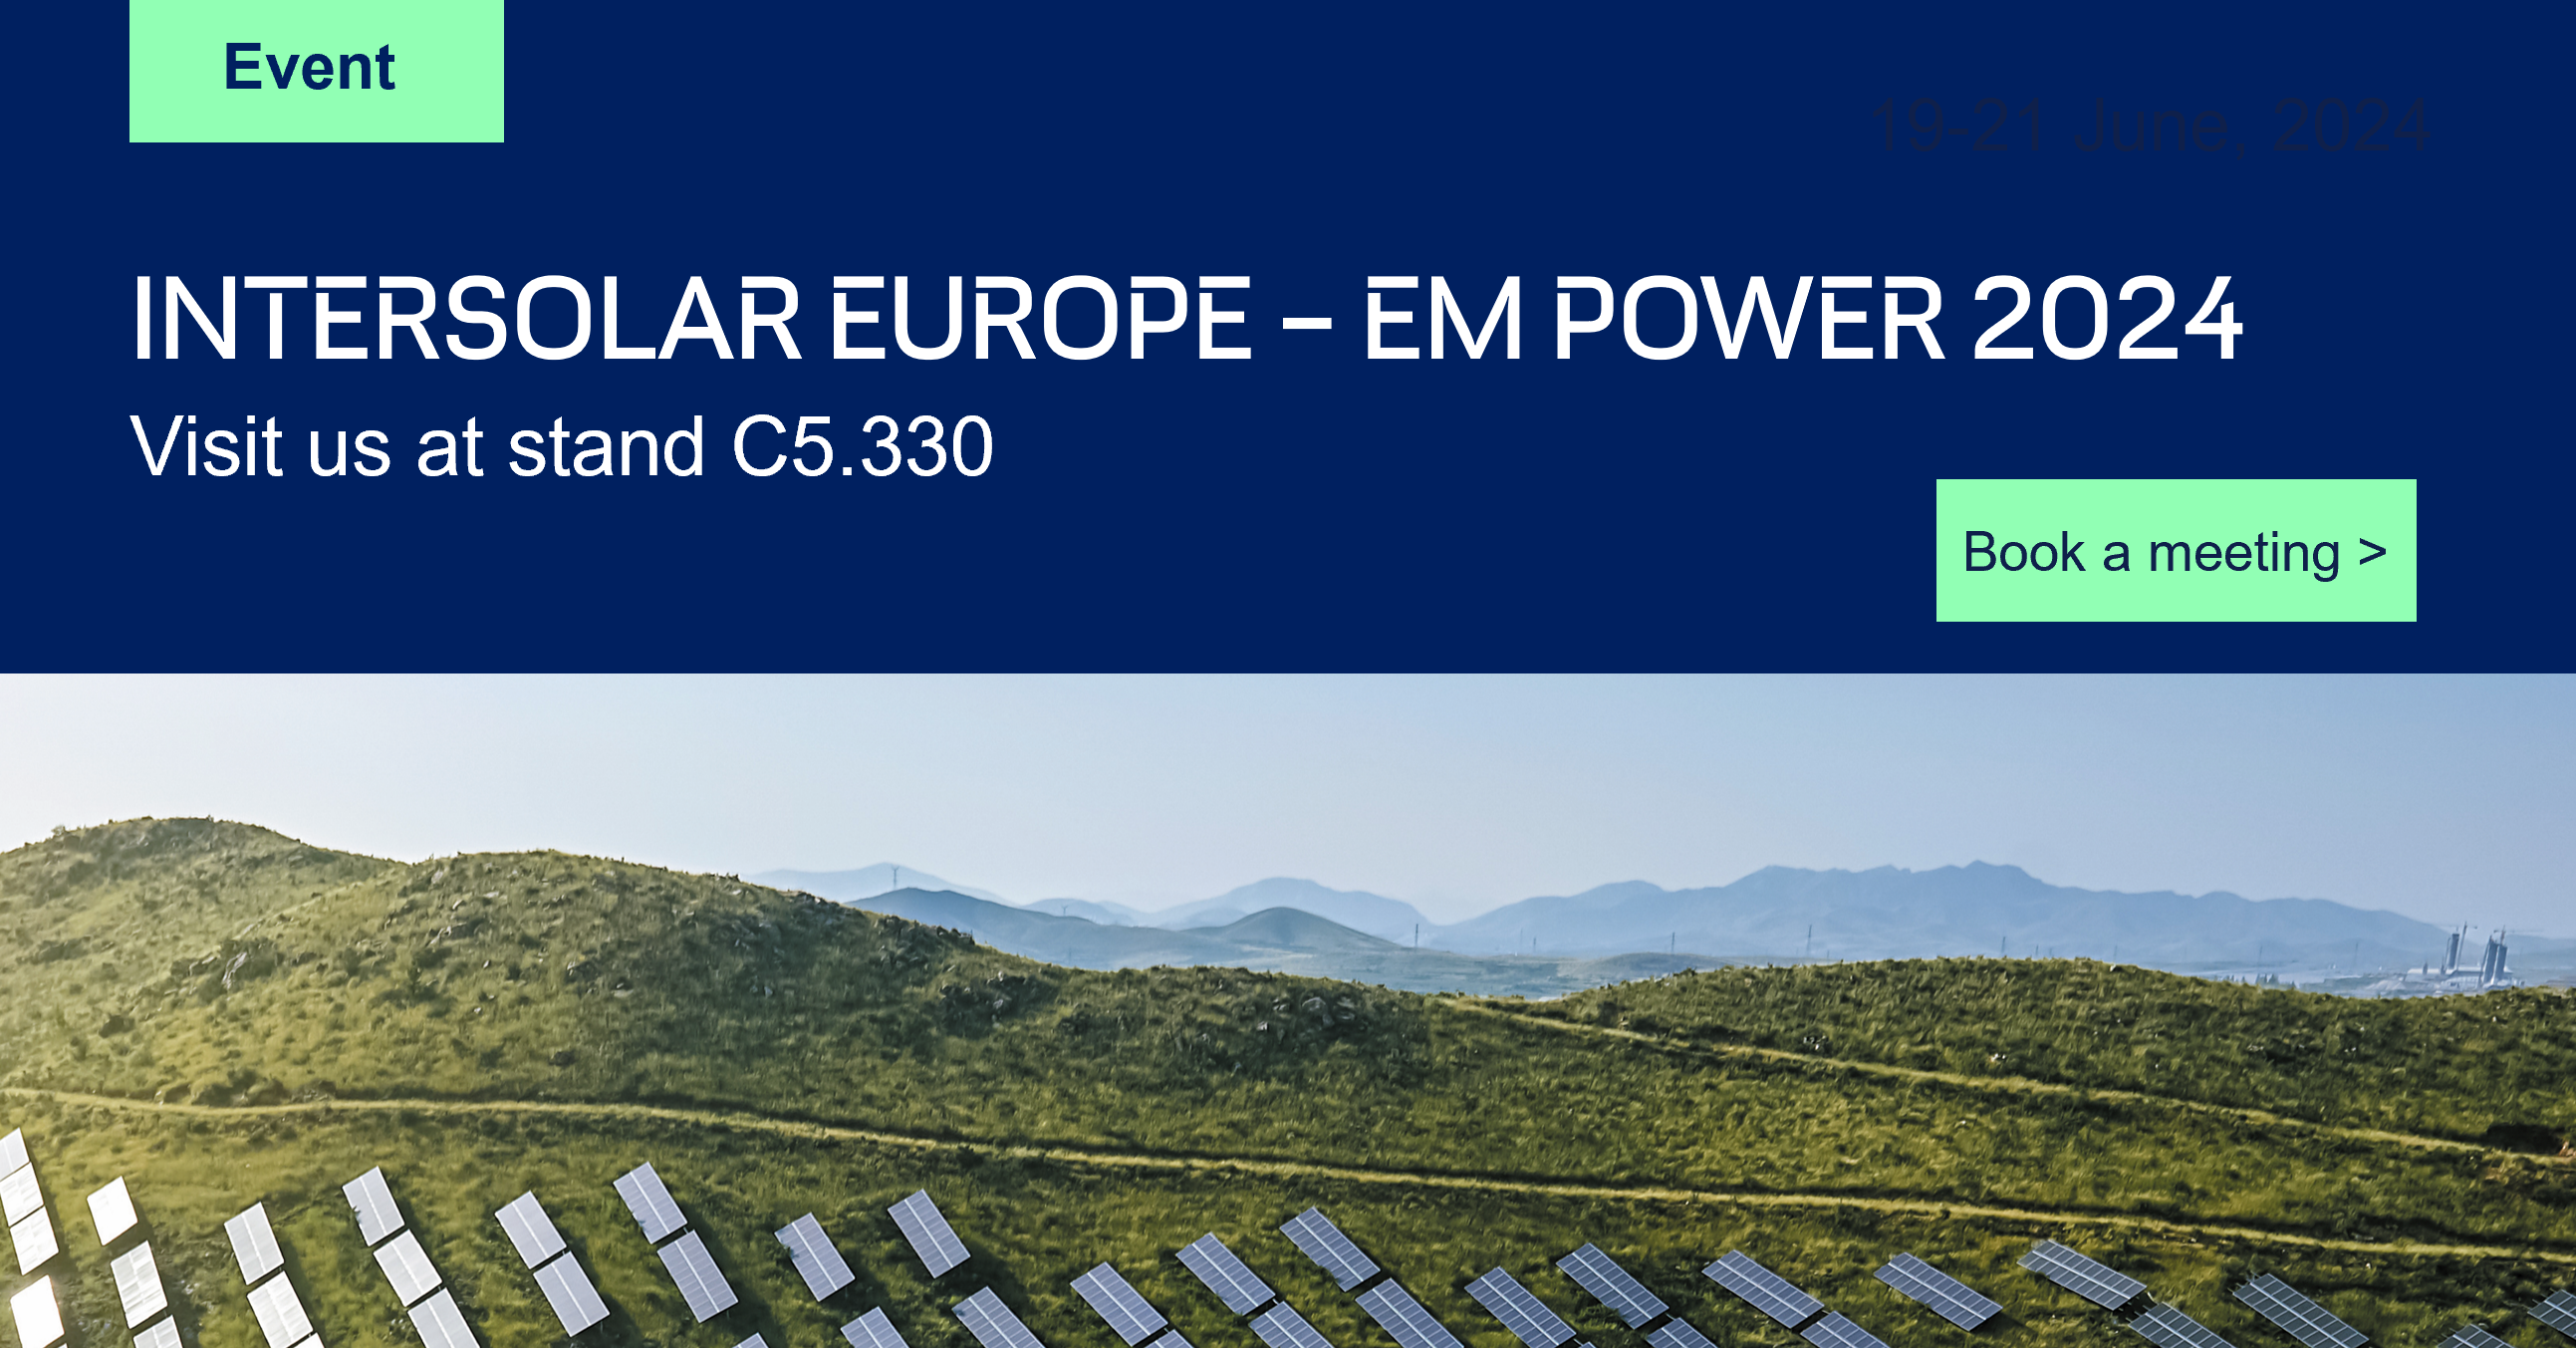 GreenPowerMonitor will attend Intersolar and EM Power in Munich, Germany on 19-21 June 2024.